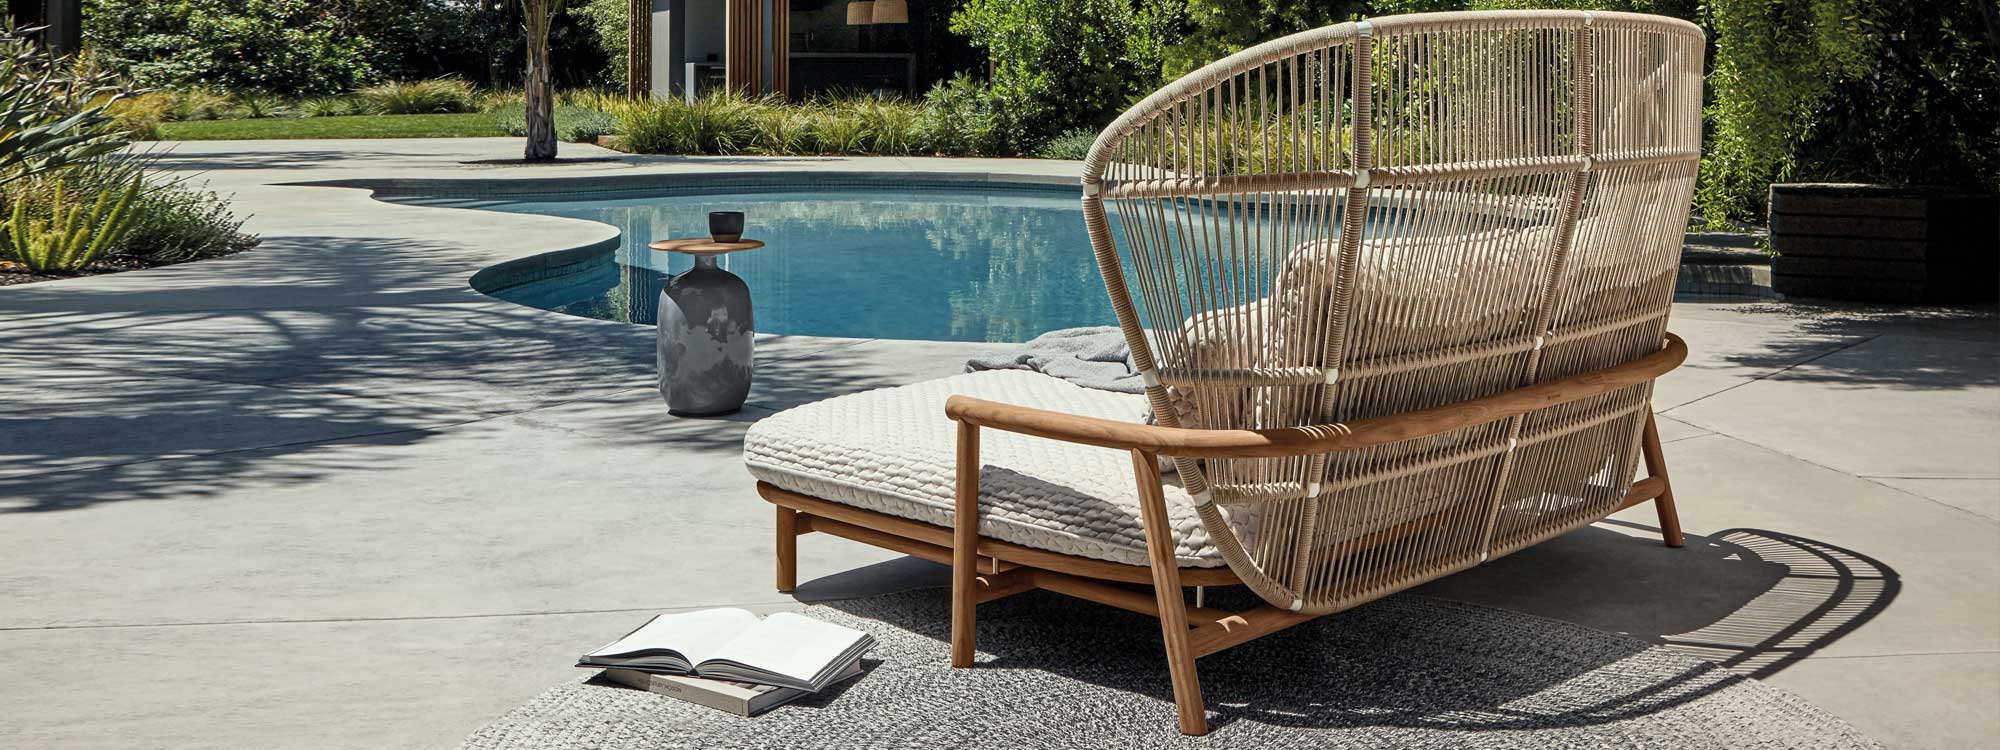 Image of Gloster Fern contemporary garden daybed with Blow low table next to sunny swimming pool